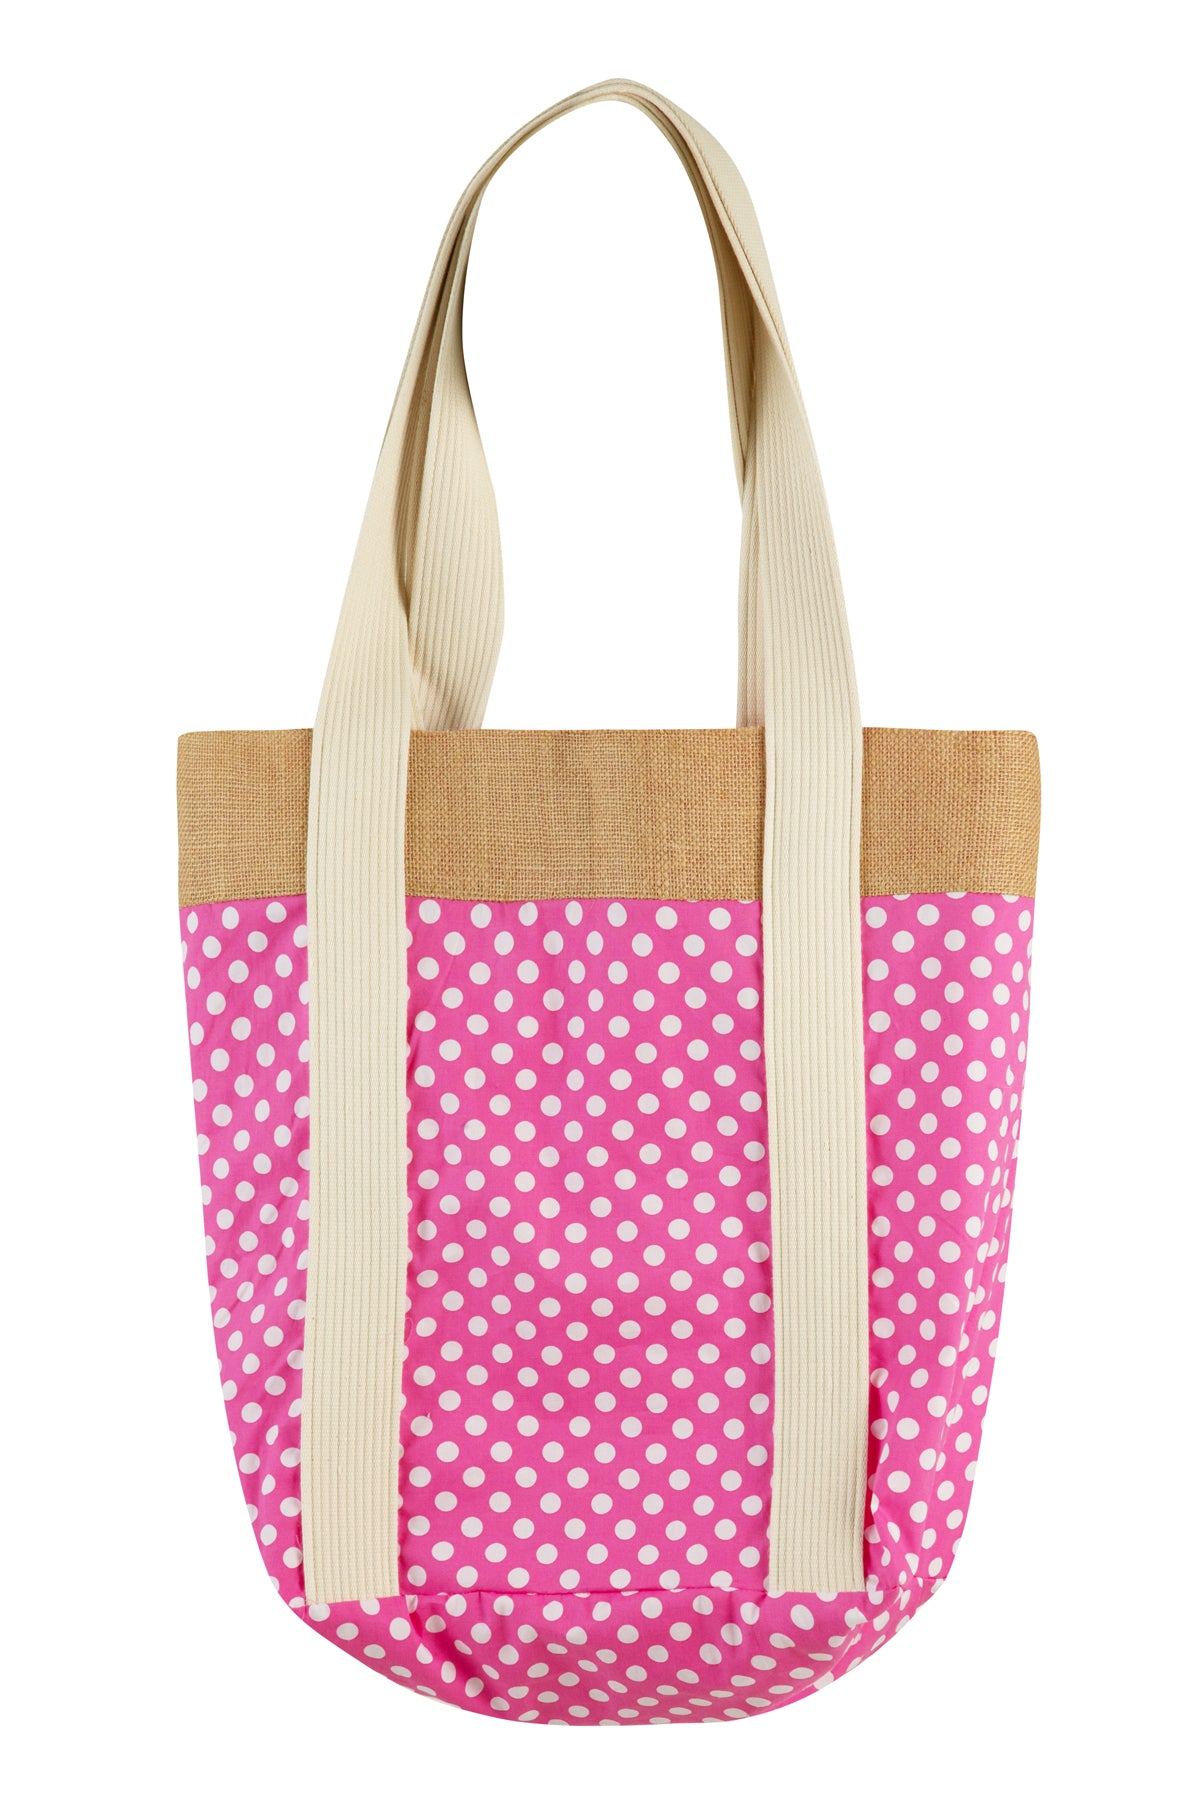 CURATE by Trelise Cooper - Tote-Ally Summer Tote Bag Pink Gingham/Spot